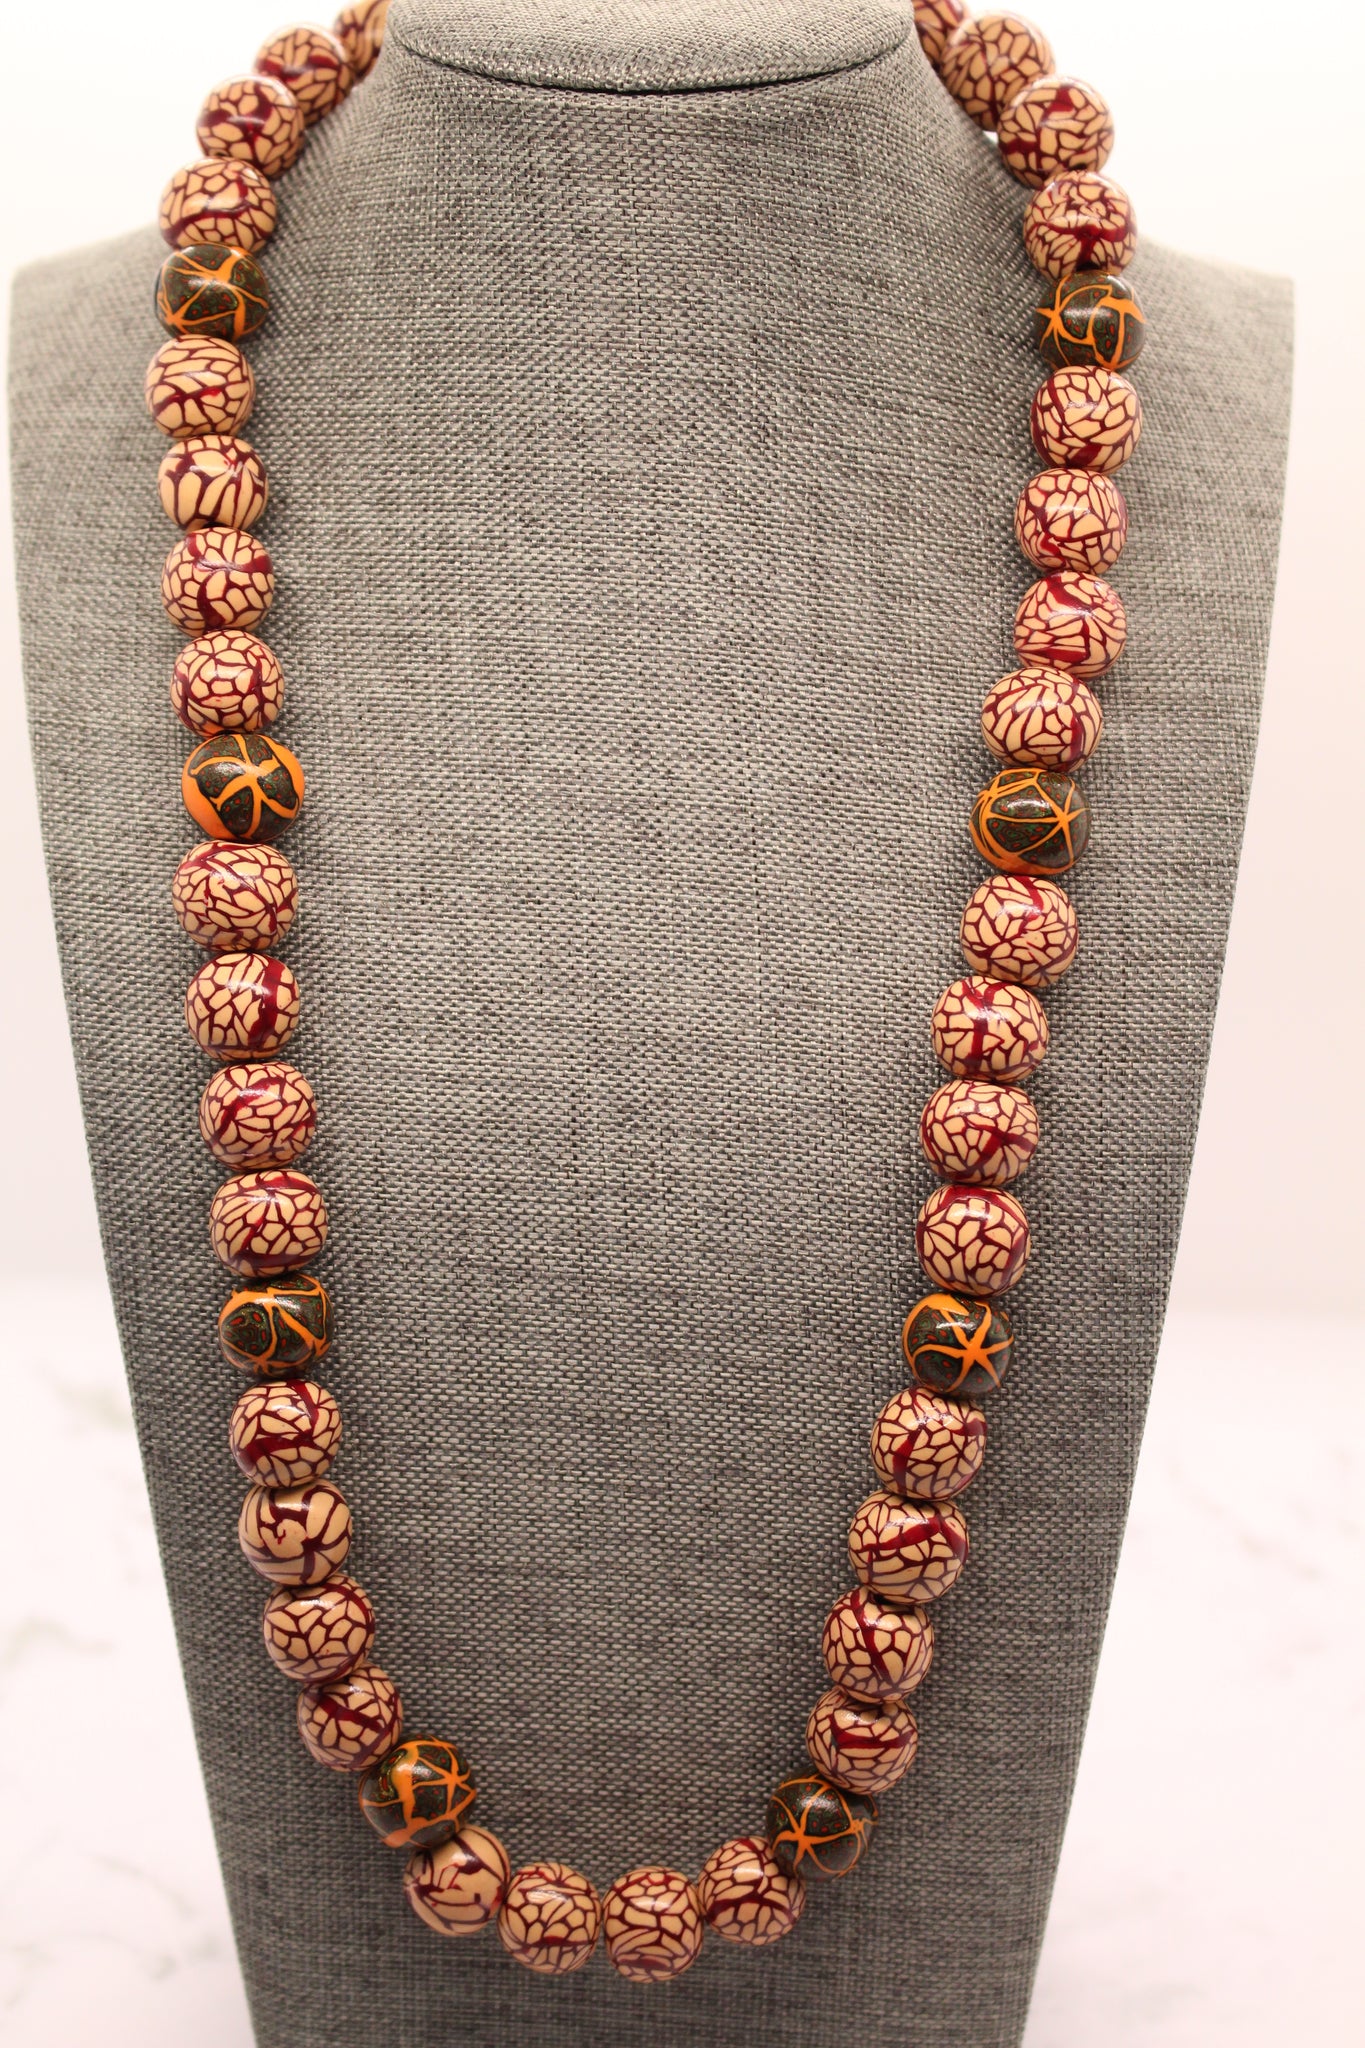 KD-SS003 The "Marooned" Maroon Color Mix, Hand-Rolled, 22 Inch Gender Neutral Necklace